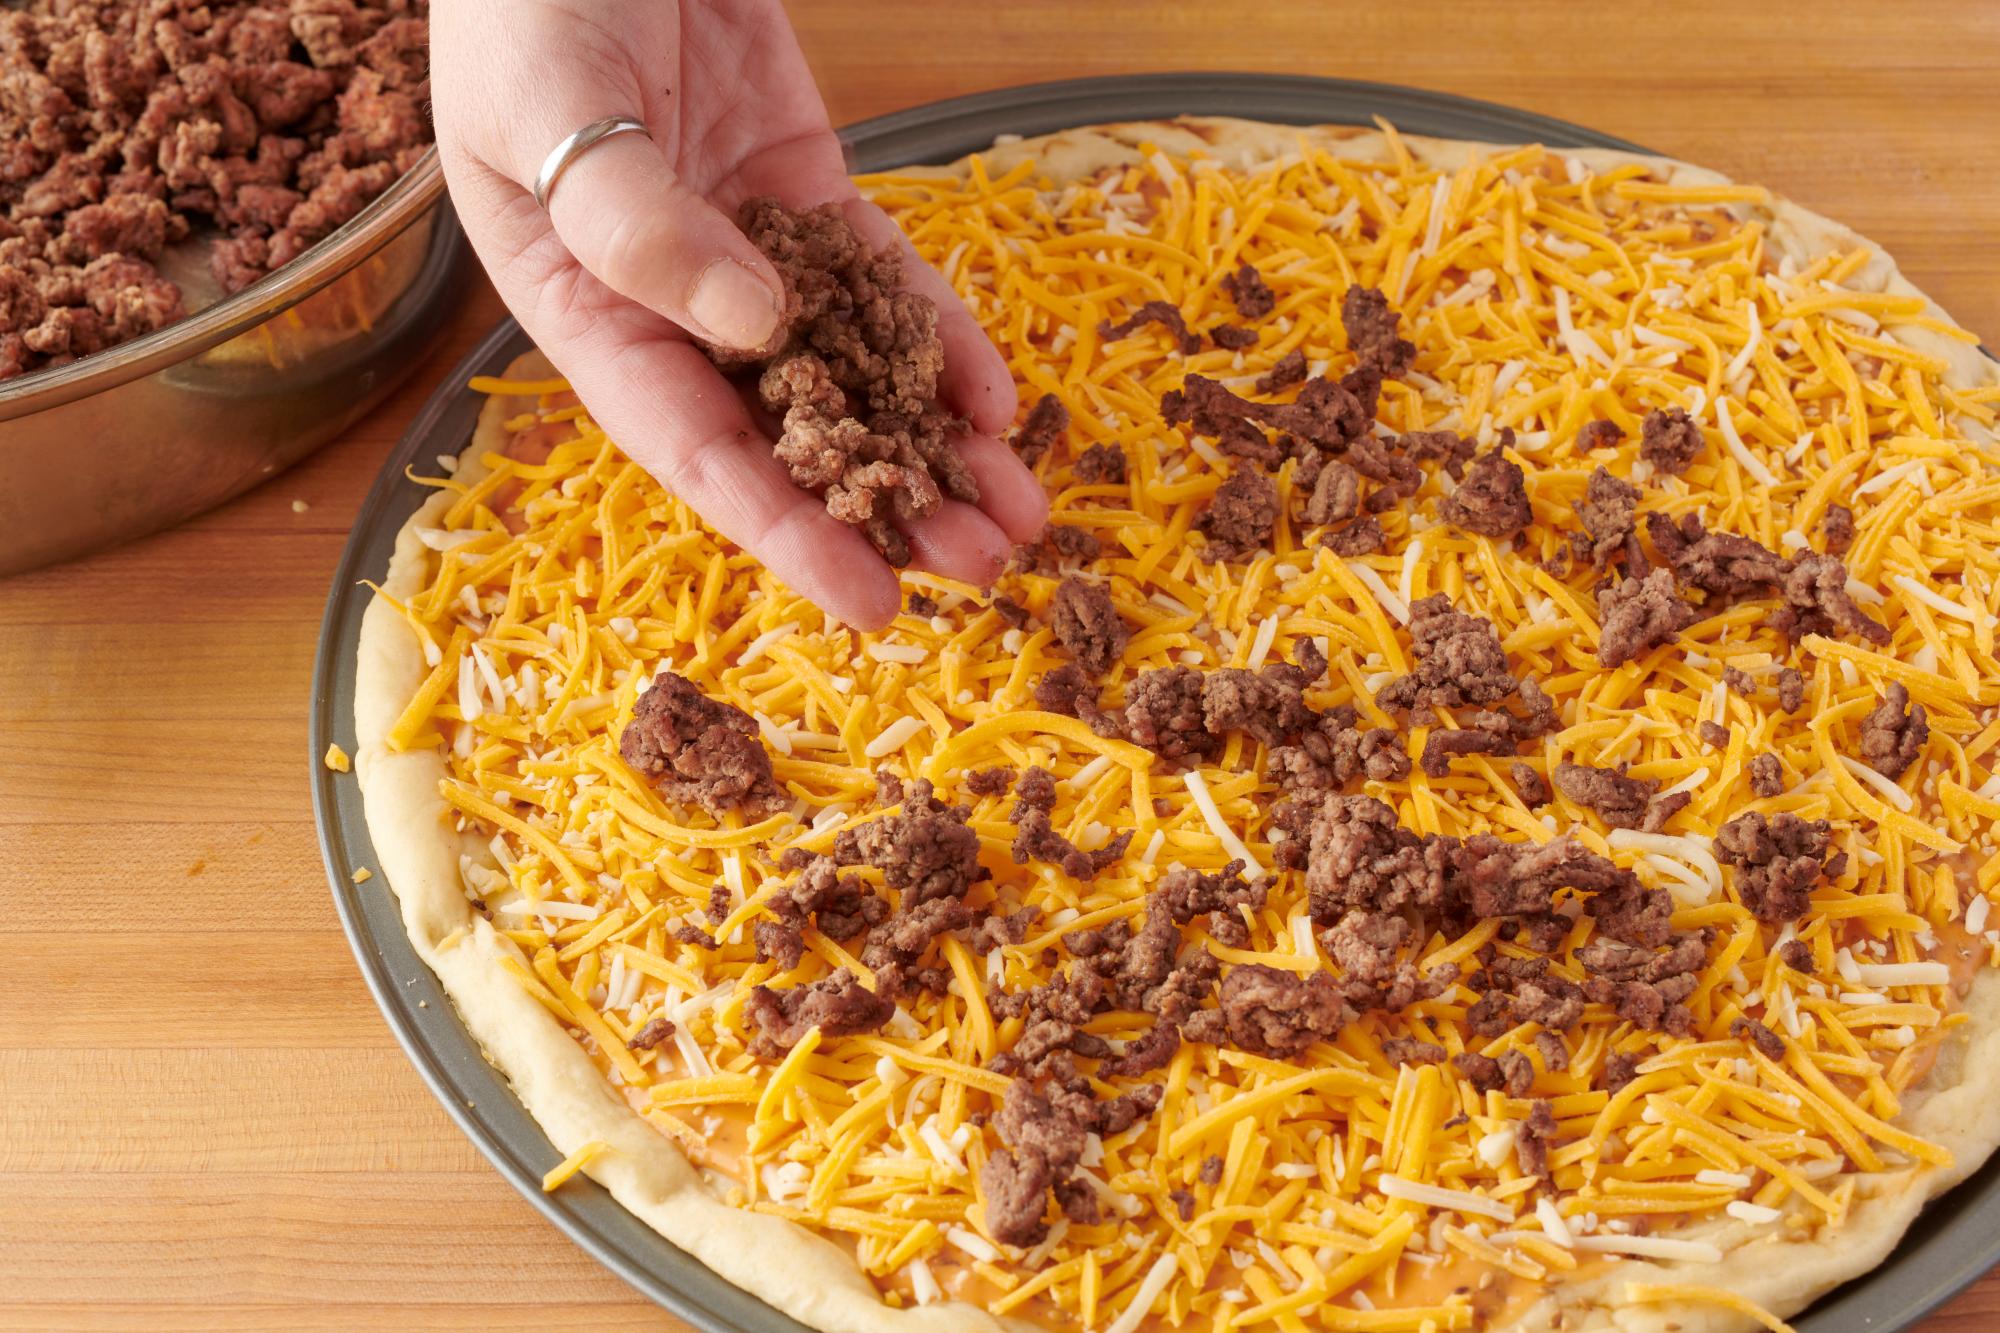 Sprinkling the ground beef on the pizza.